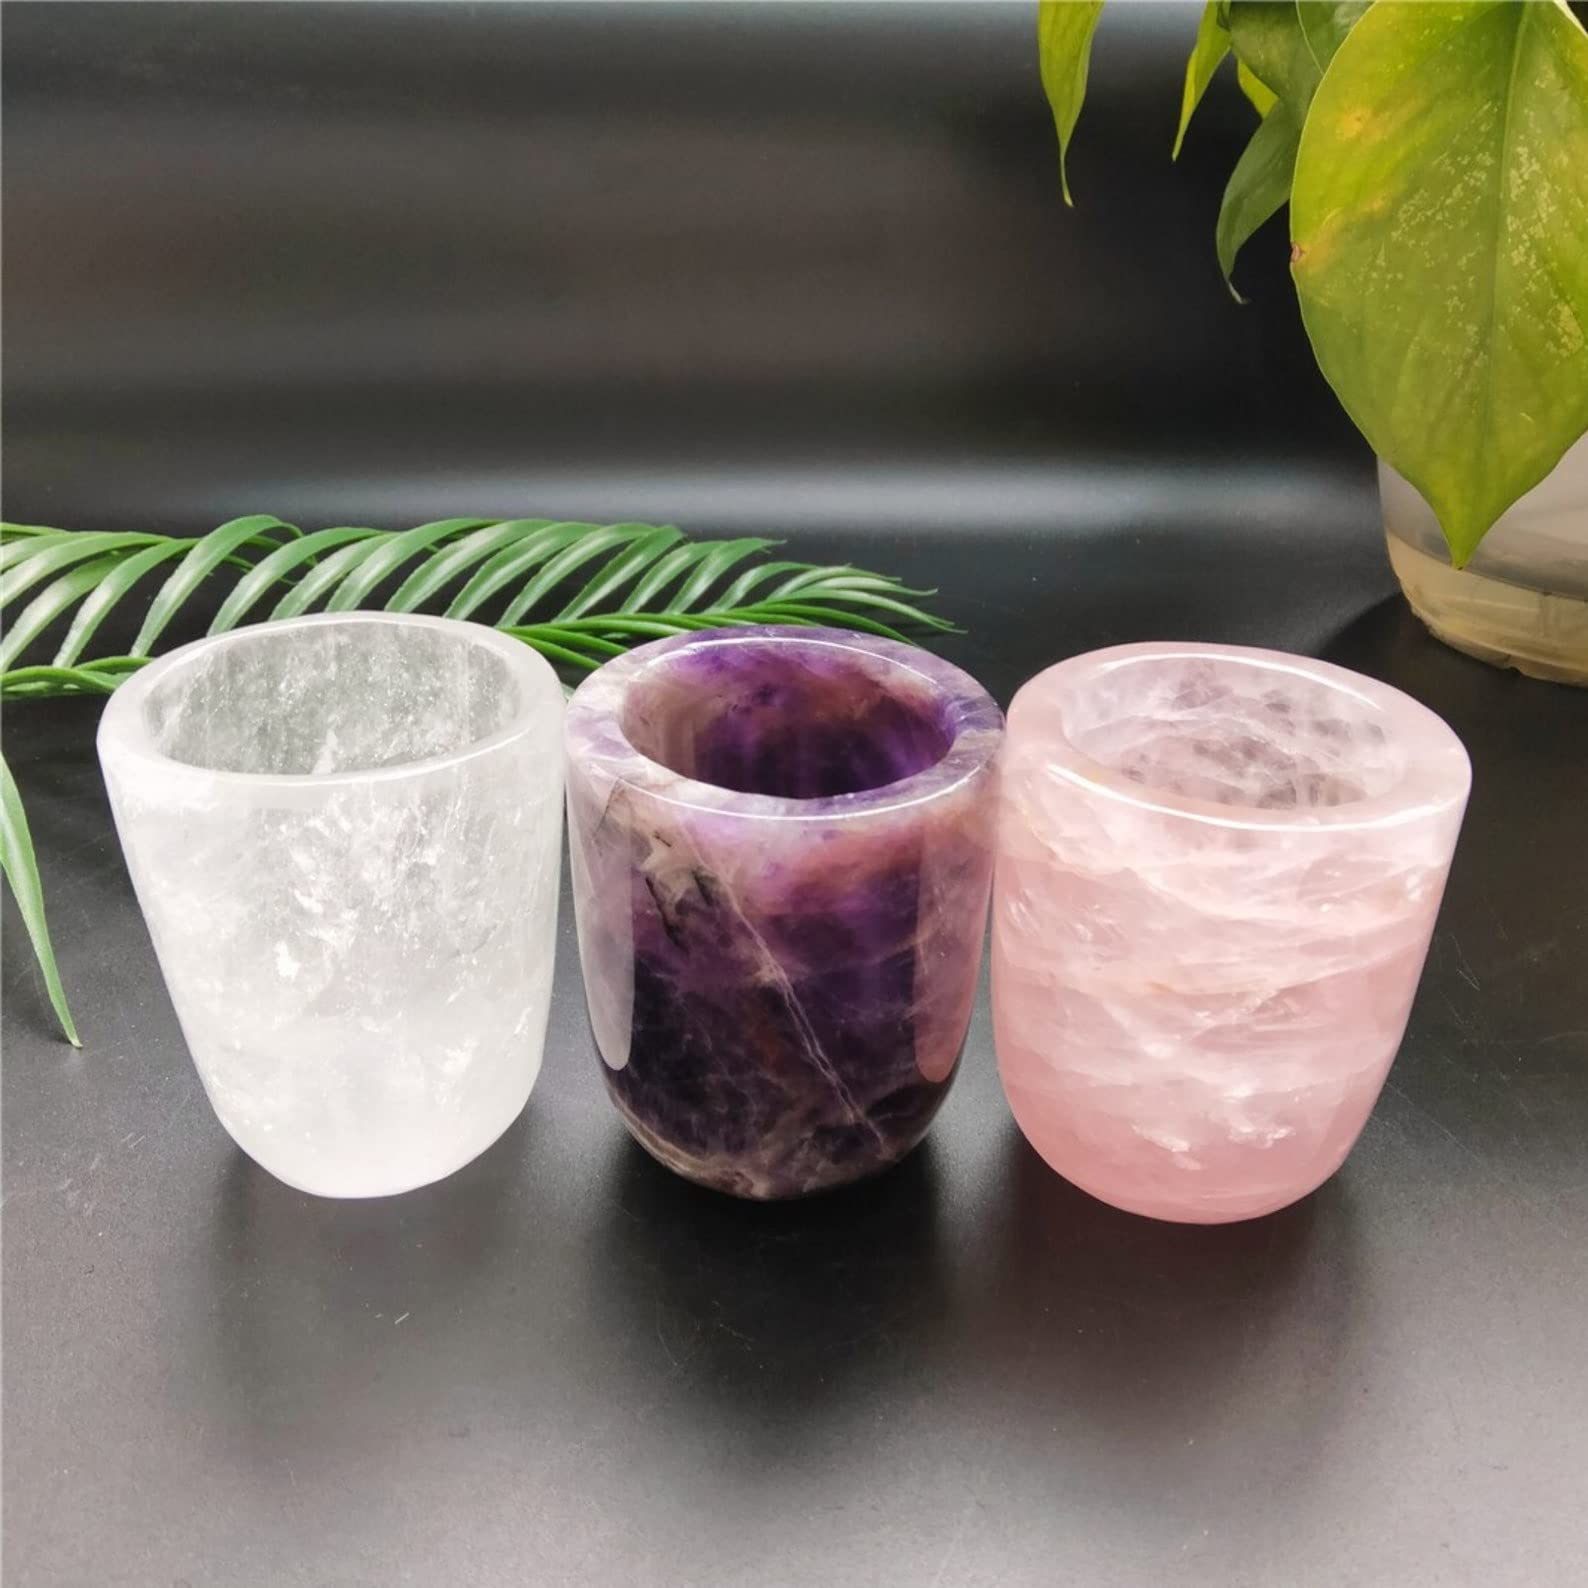 WOWVITY Crystal Drink Rose Quartz Cup, Dream Amethyst Tea Cup, Clear Quartz Cup without Handle, Crystal Tea Cup, Gemstone Cup for Wedding Party for Guests, Housewarming Gift for Couple